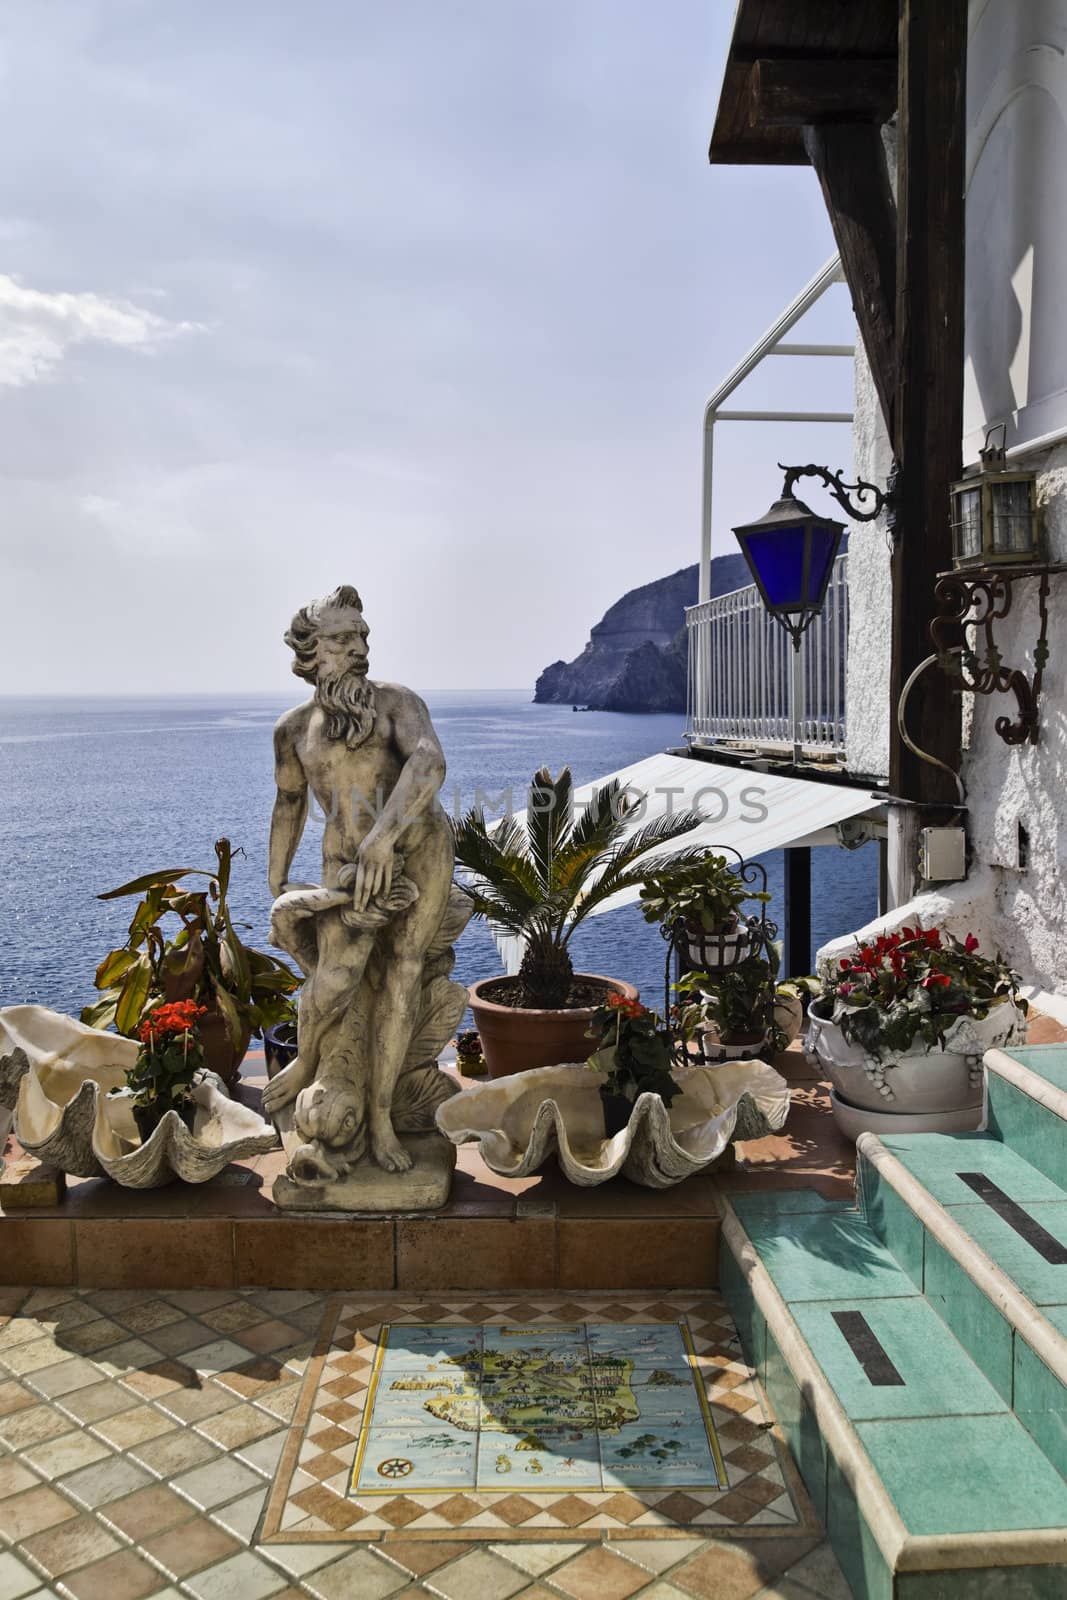 ITALY, Campania, Ischia island, S.Angelo, view of S.Angelo rocky coast from a house by the sea